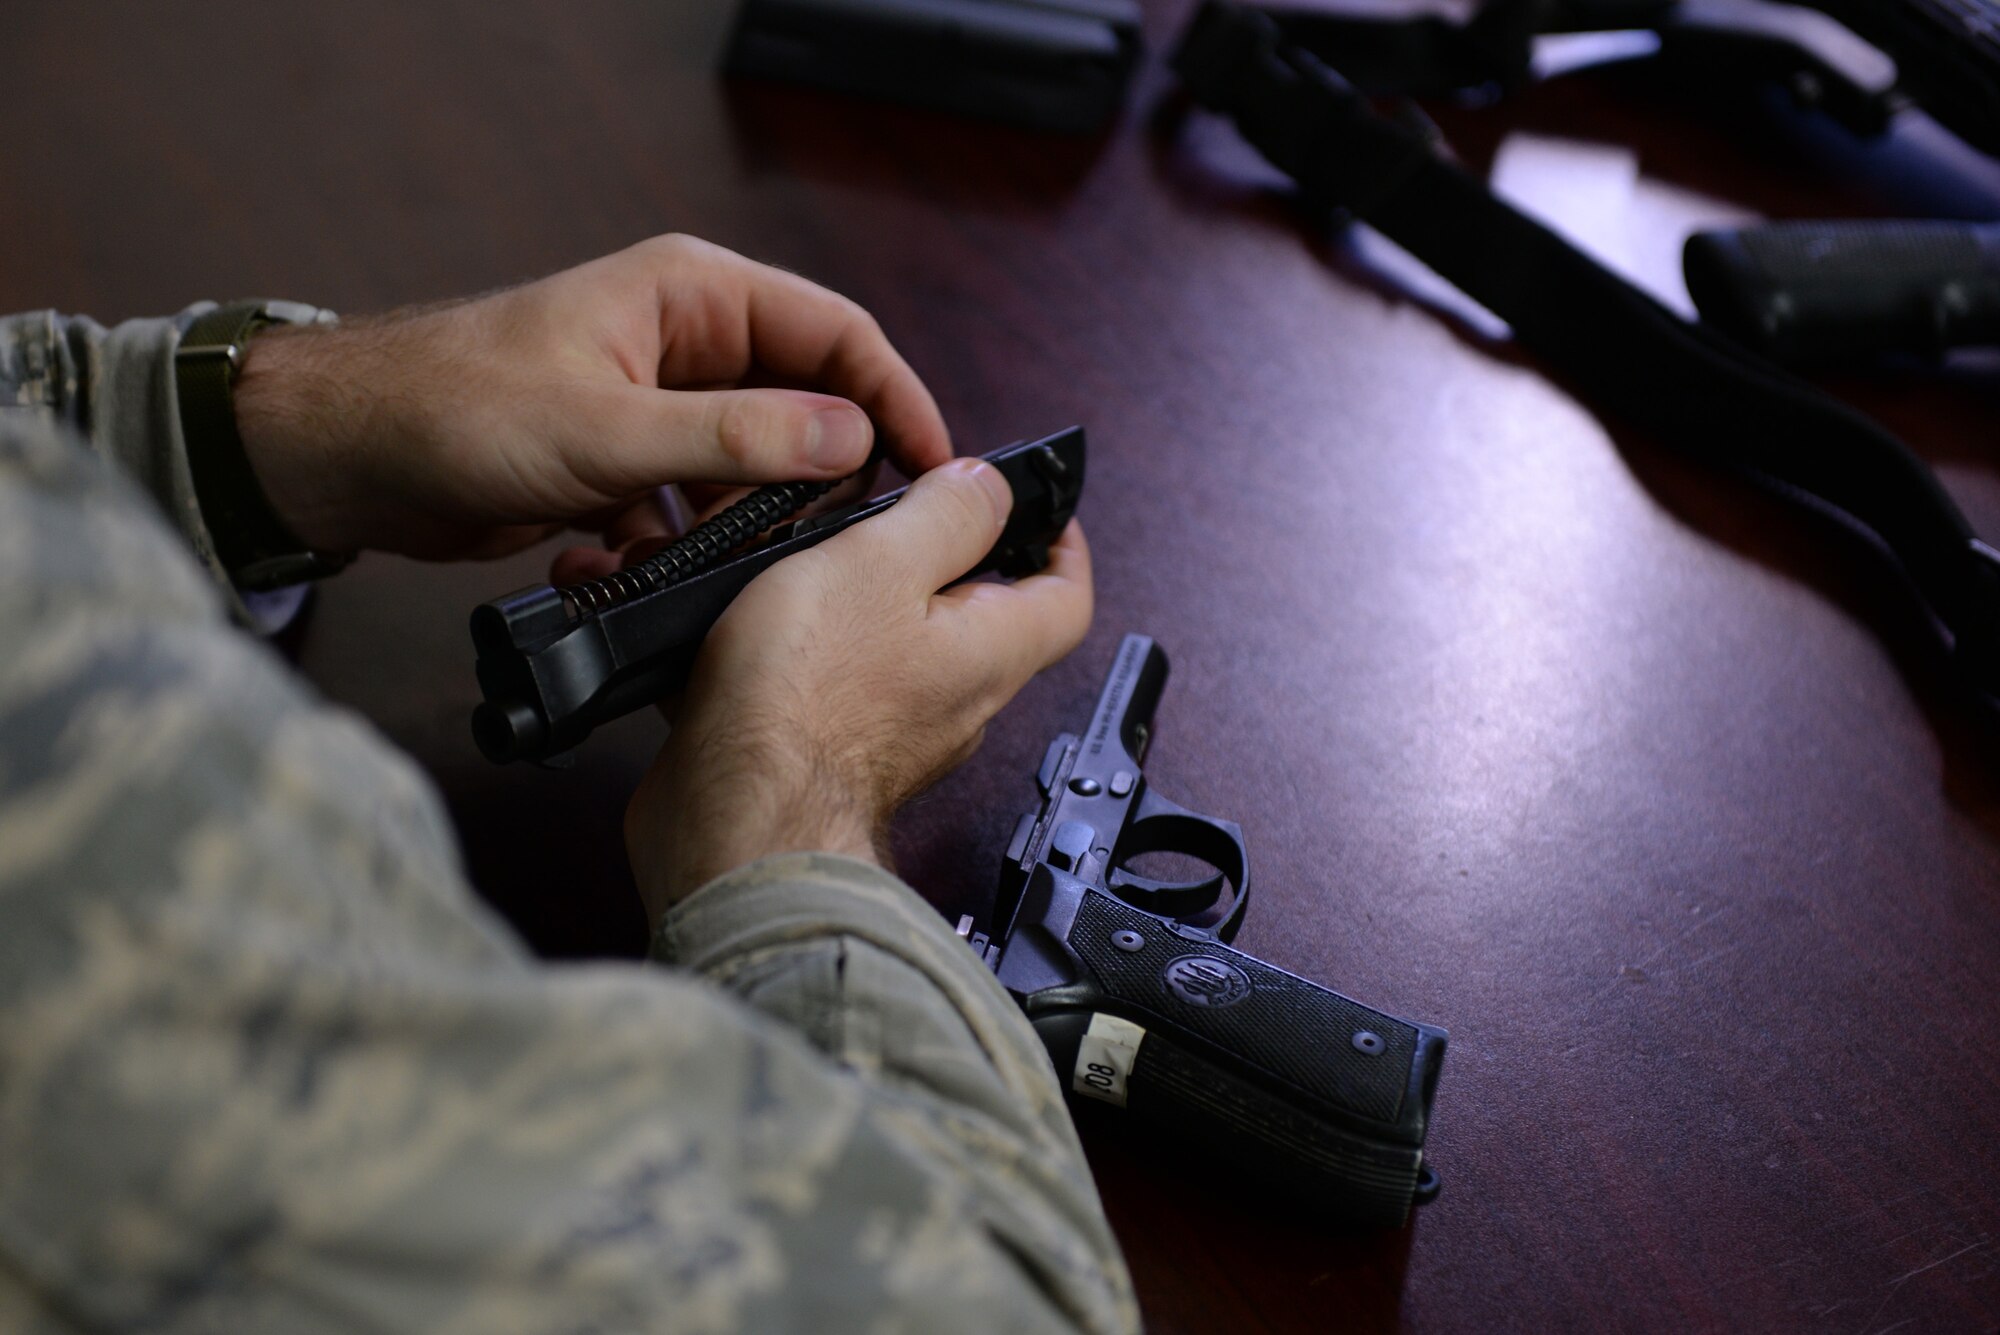 Staff Sgt. Stephen Horton, 36th Security Forces Squadron NCO in charge of resource protection and physical security, assembles an M9 pistol during annual qualification training July 7, 2016, at Andersen Air Force Base, Guam. Prior to firing, students are taught how to handle their weapon, take it apart and conduct preventative maintenance. (U.S. Air Force photo by Airman 1st Class Jacob Skovo)